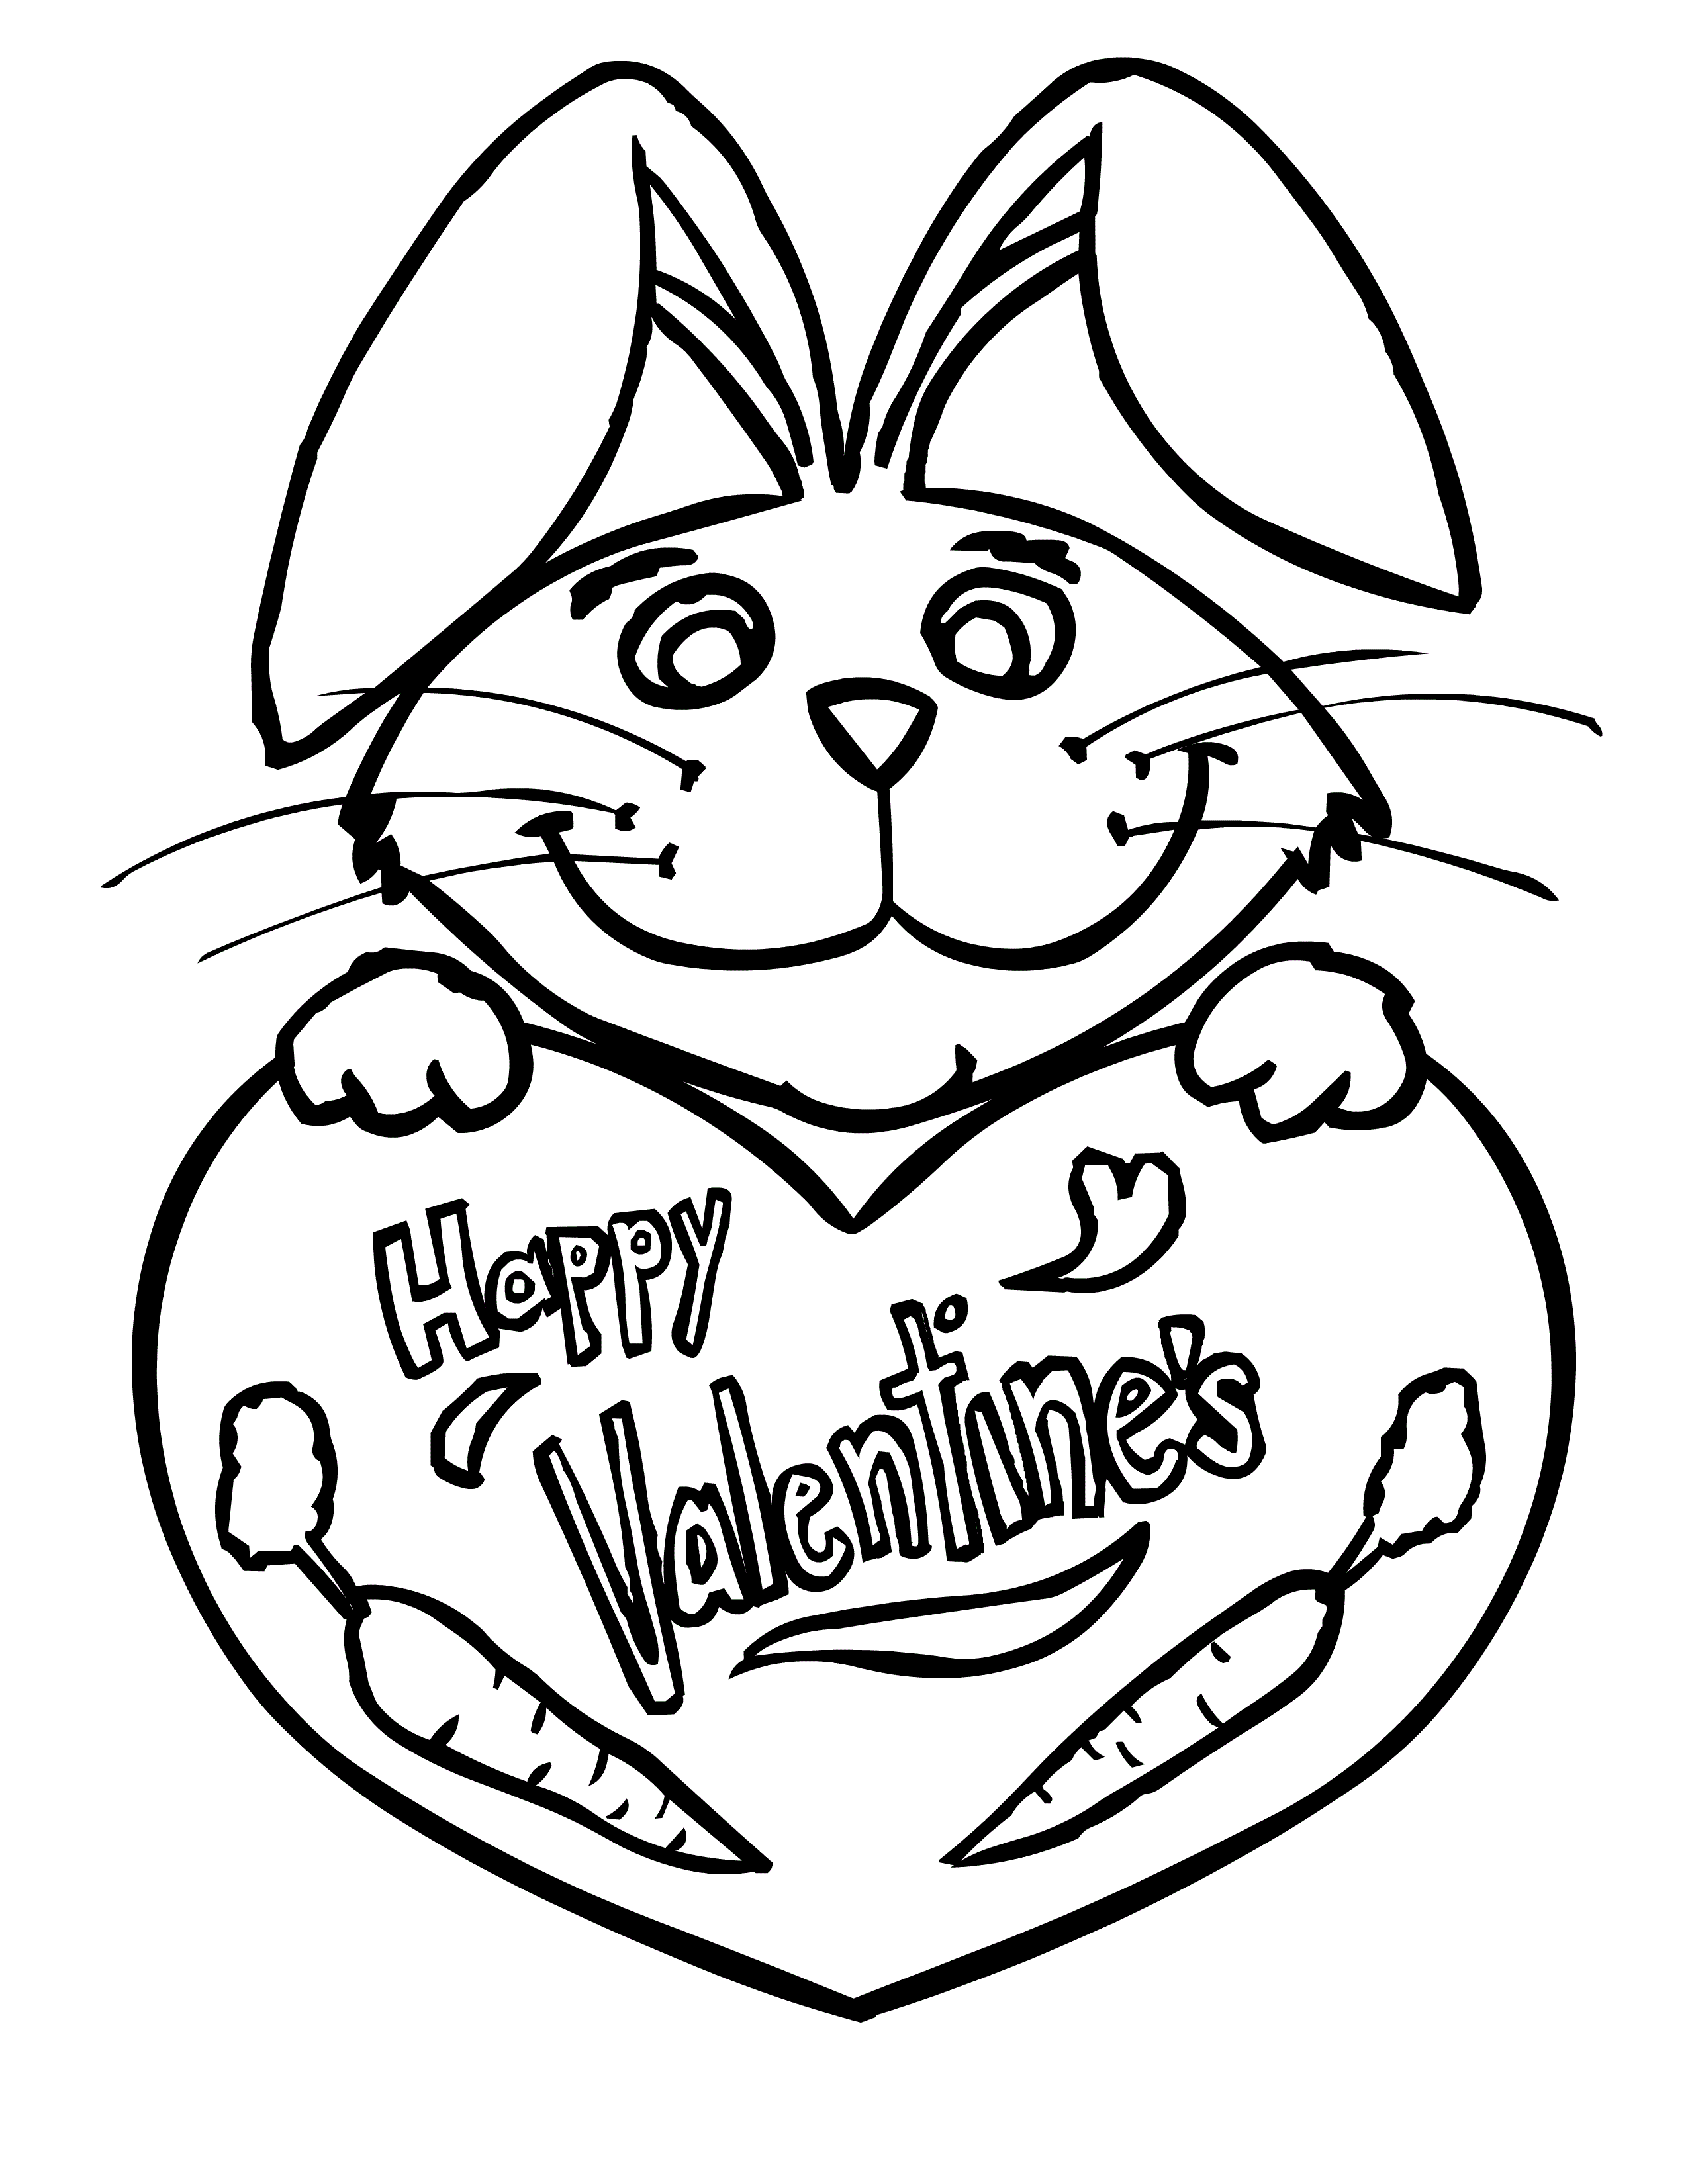 valentines printable coloring pages colormecrazyorg valentine coloring pages coloring printable valentines pages 